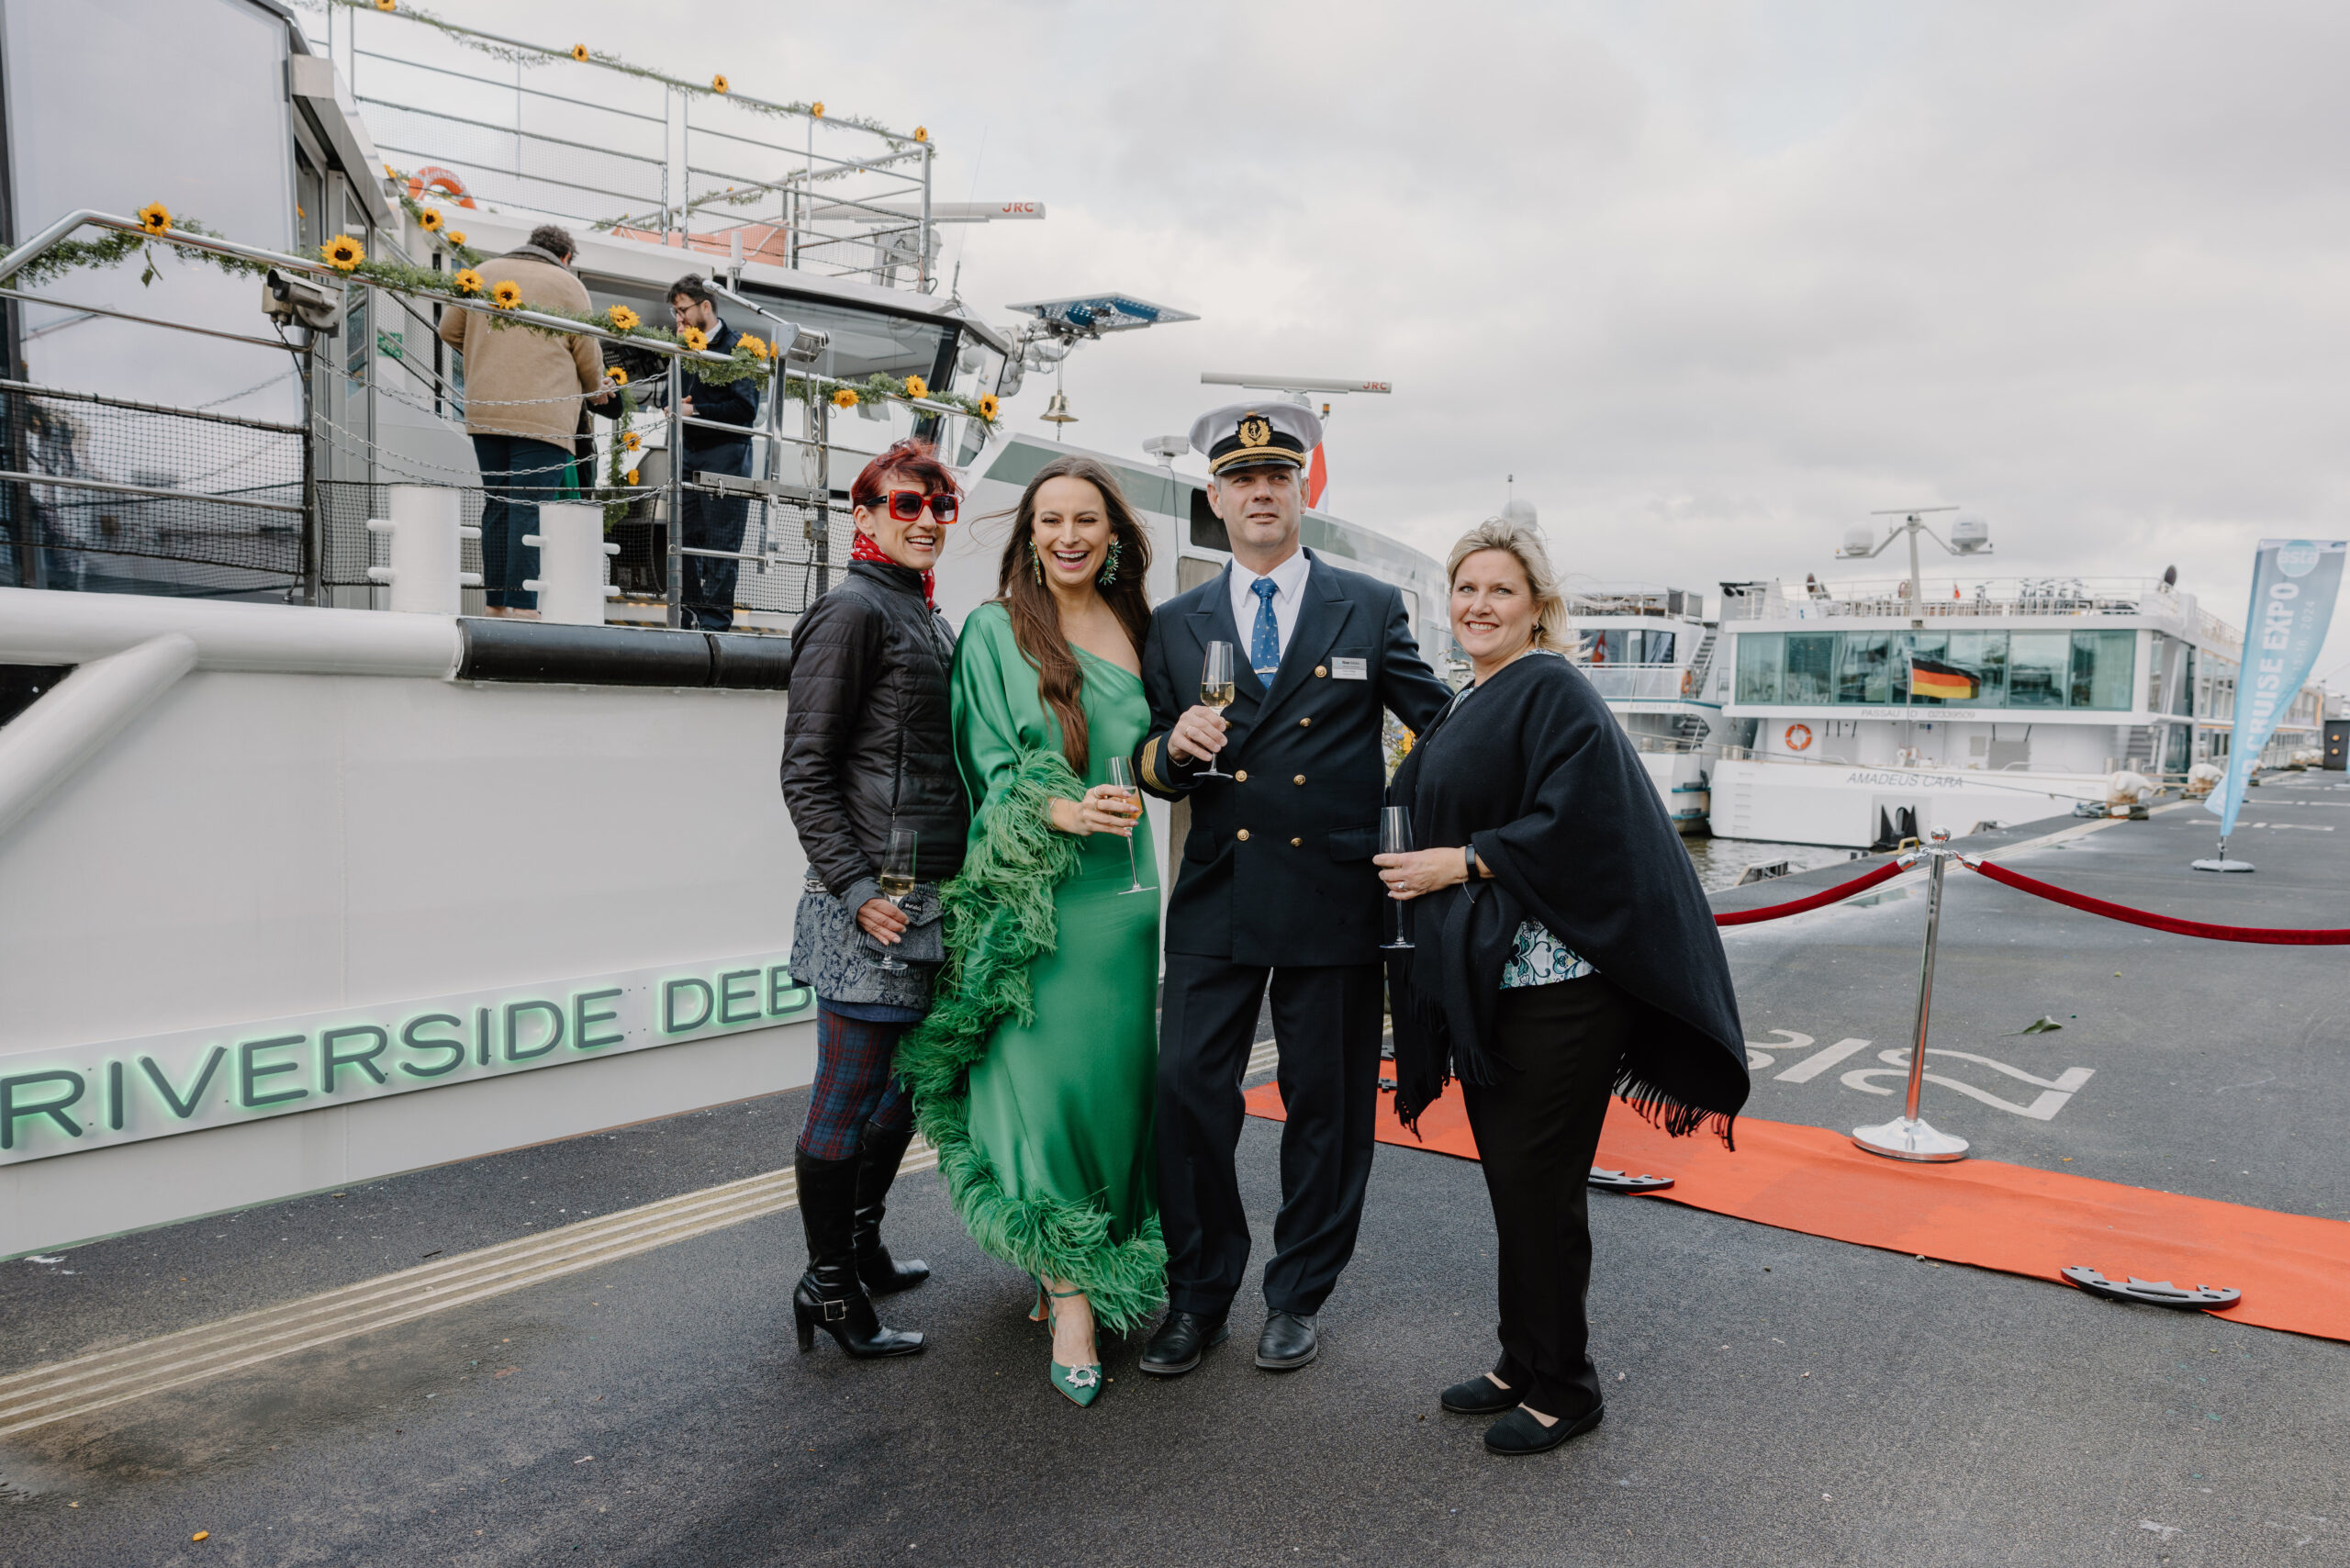 The captain of Riverside Debussy and guests at the christening of the ship in Amsterdam.